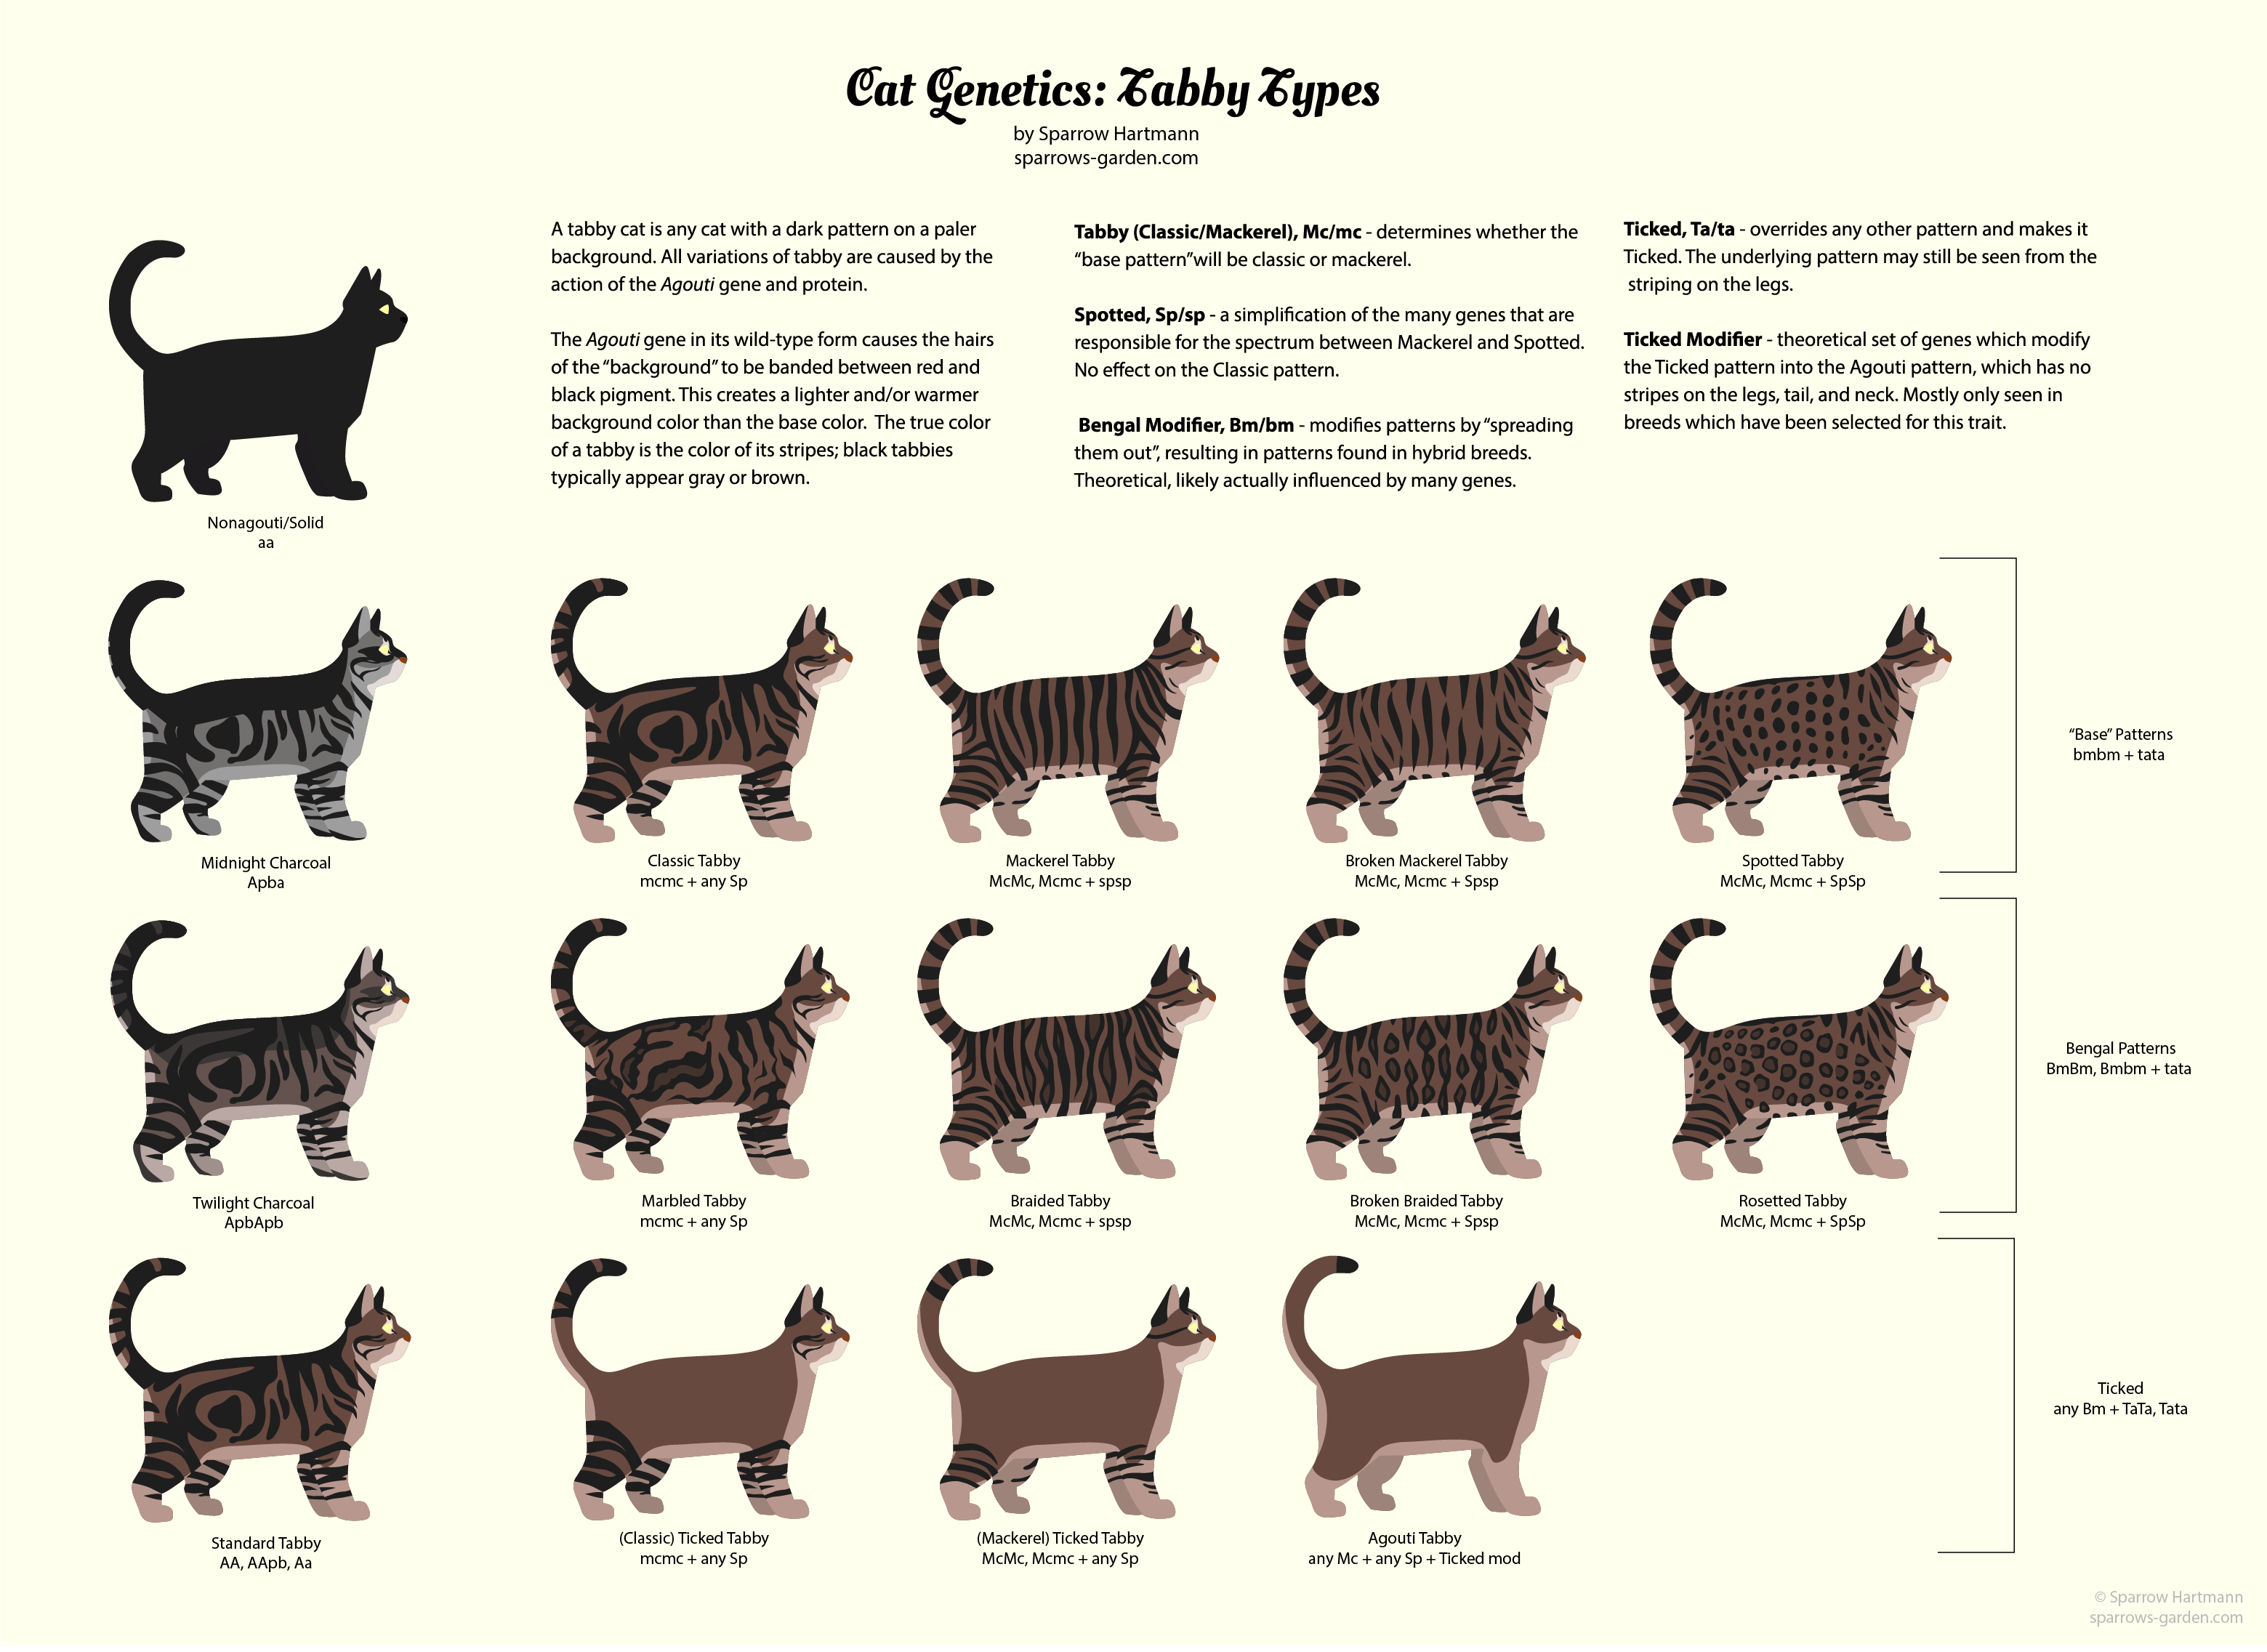 spotted tabby pattern